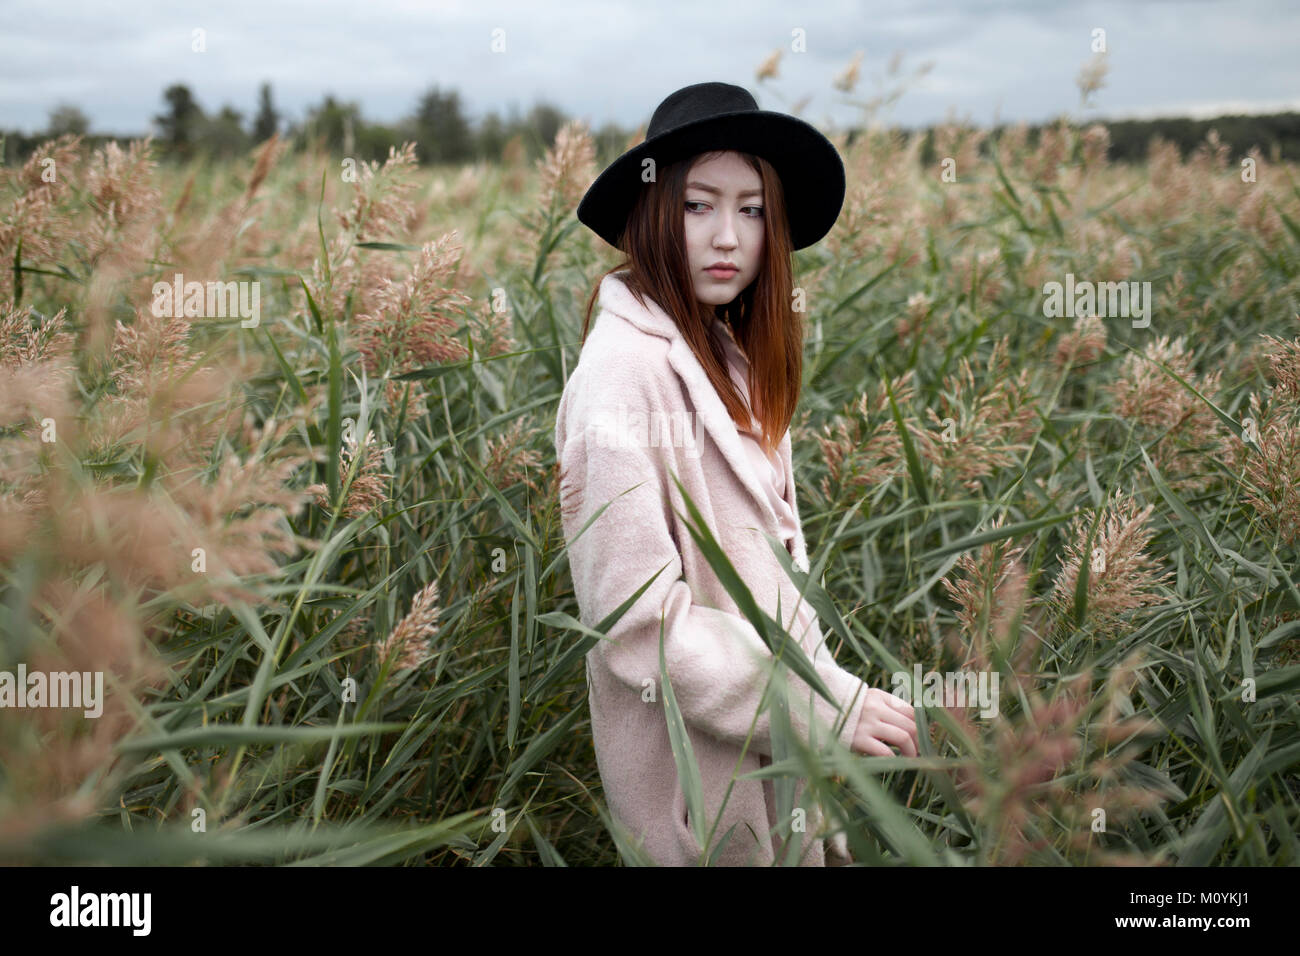 Asian woman standing in field Banque D'Images